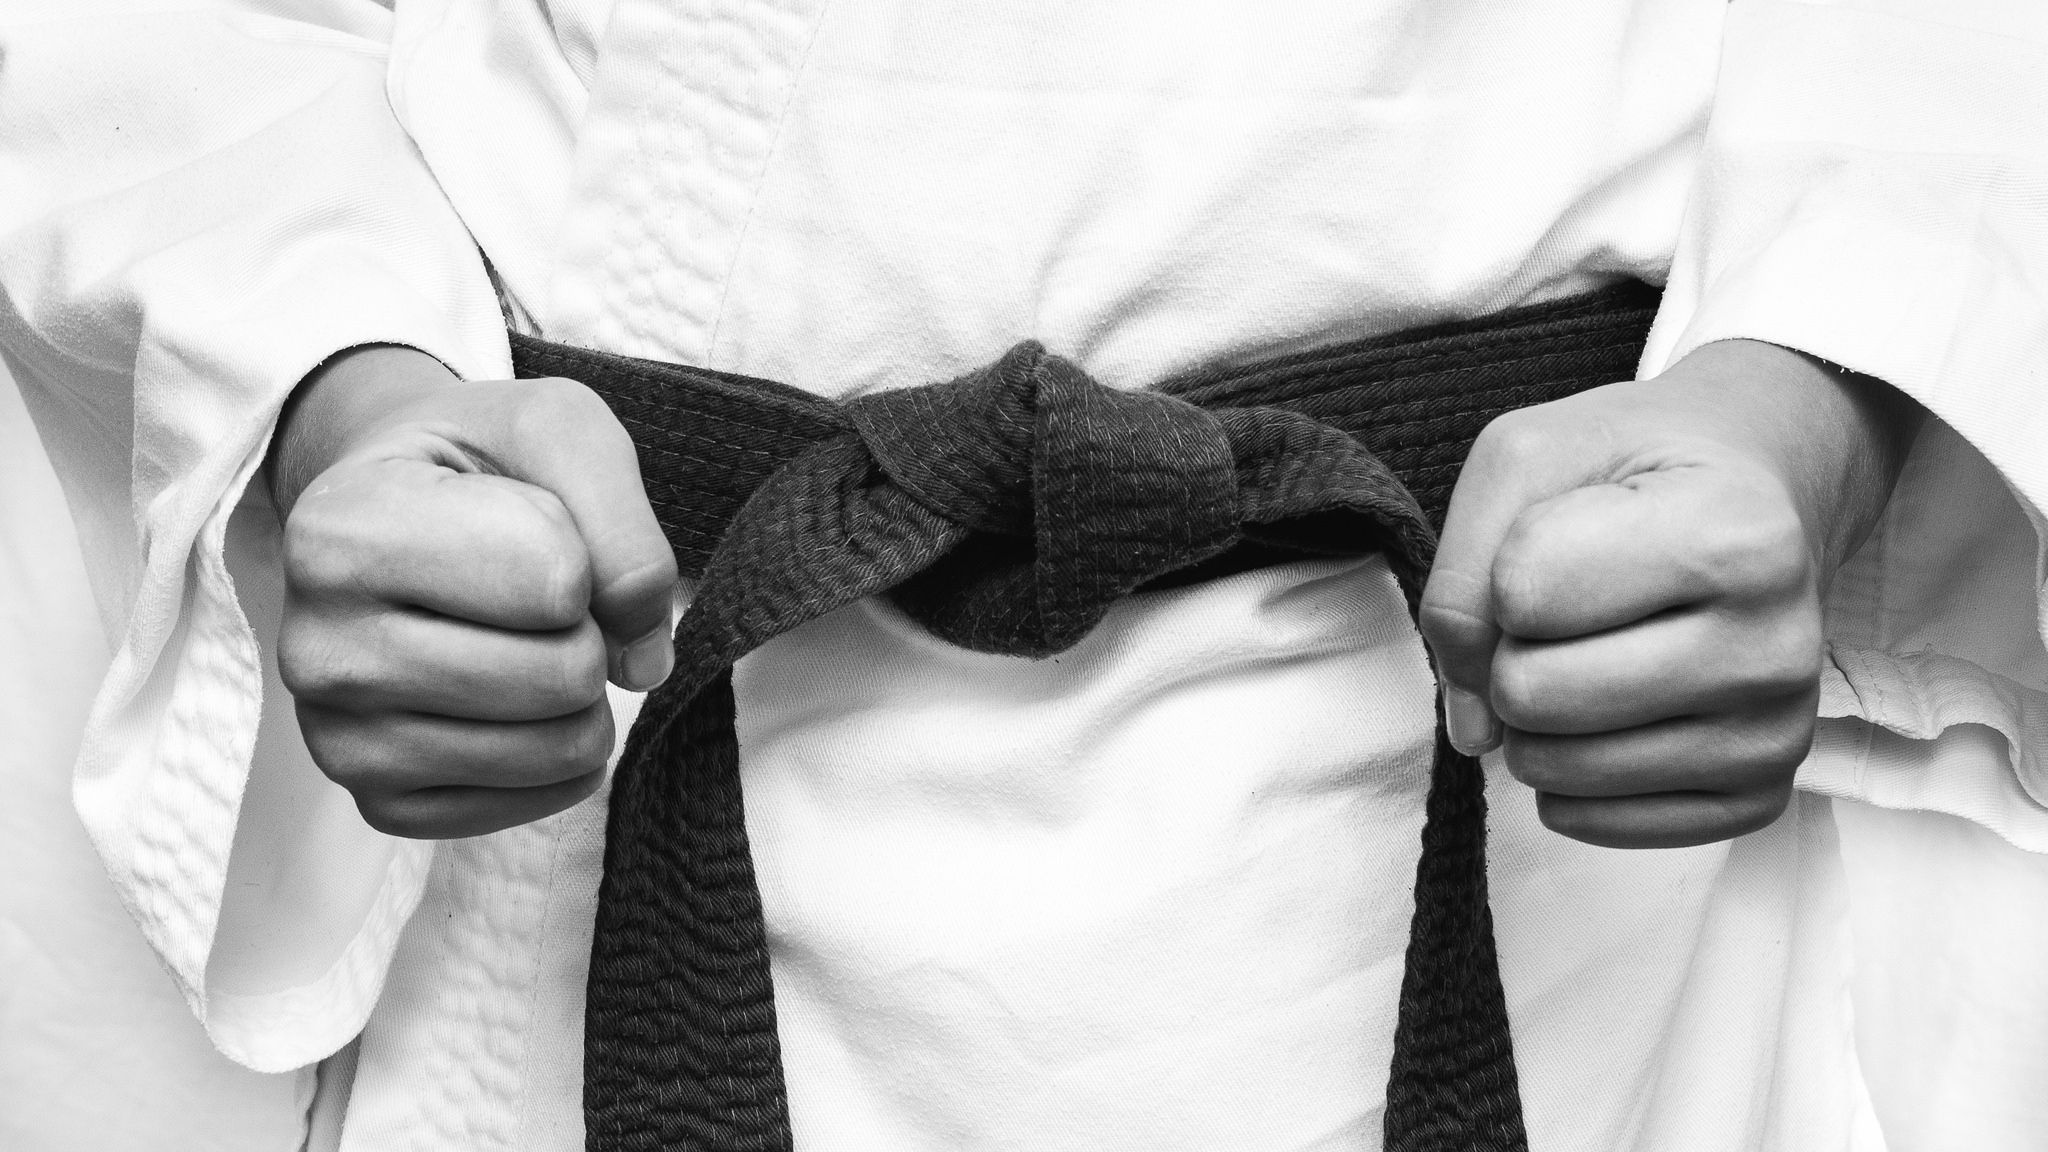 Karate: Monochrome black belt, One of the highest ranks in Chinese martial arts. 2050x1160 HD Wallpaper.